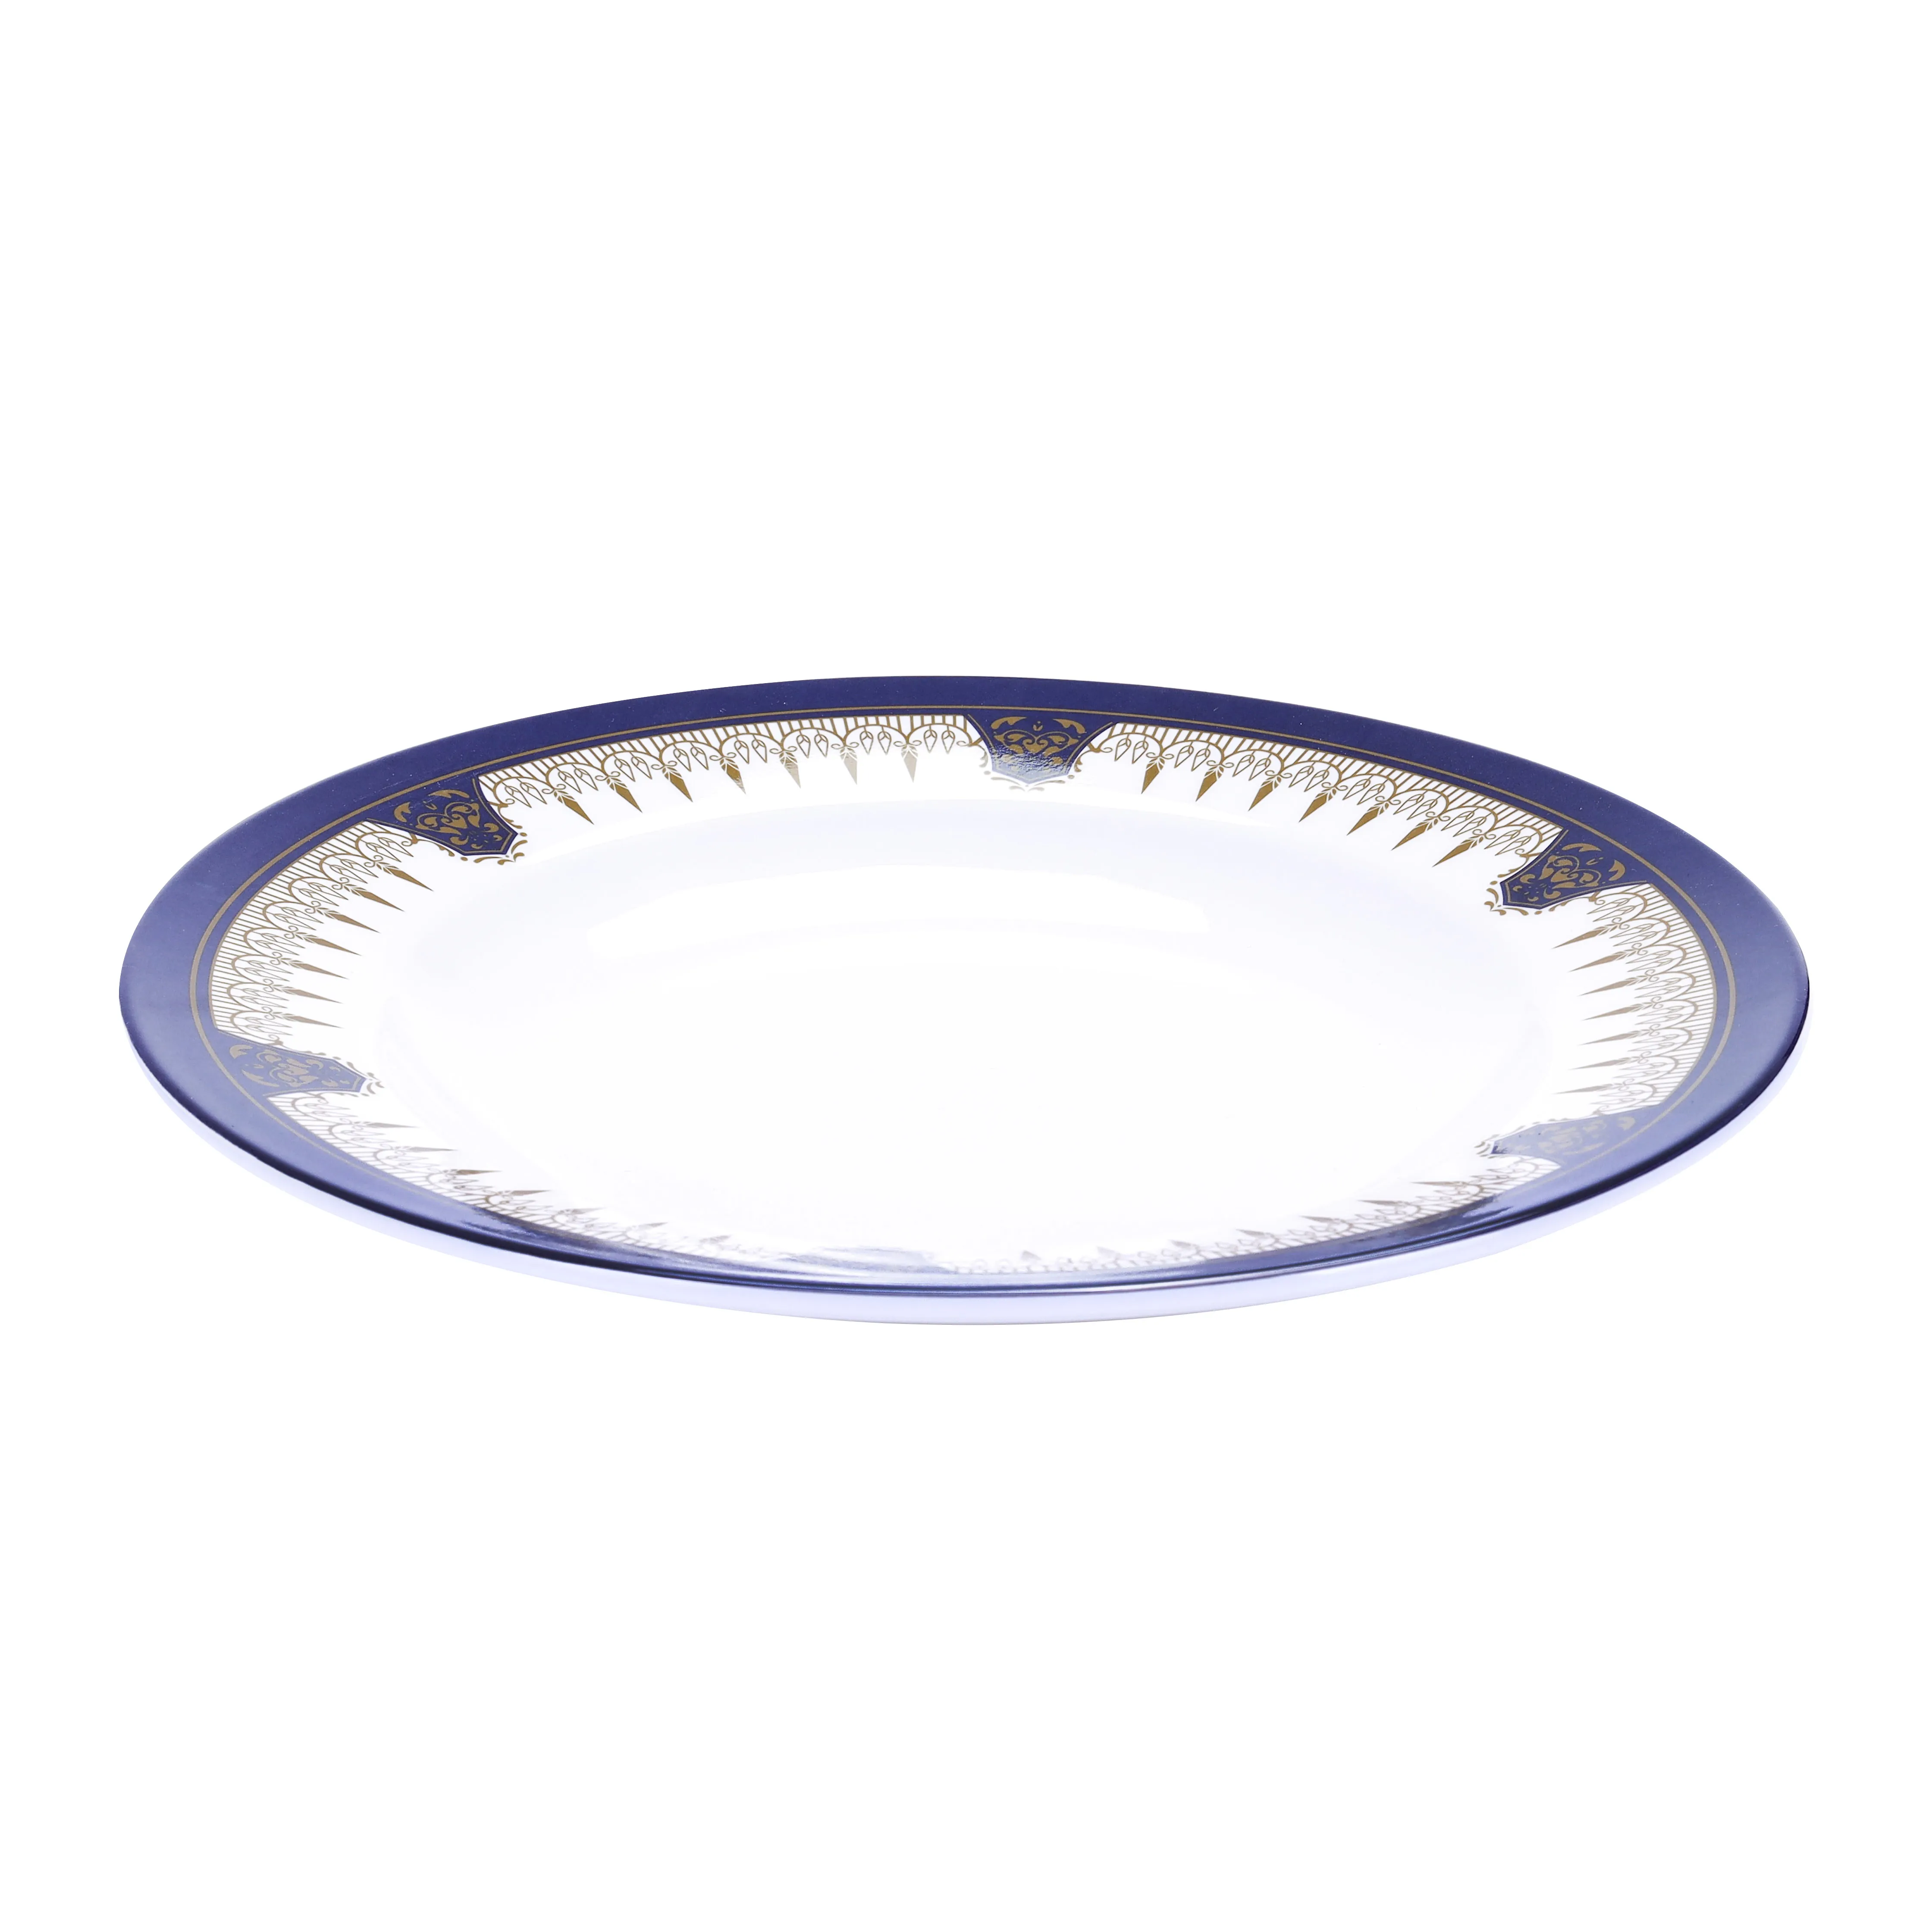 Royalford  10 Soup Plate - Soup Plates Pasta Plates plate with playful Classic decoration, dishwasher safe Ideal for Soup, Deserts, Ice Cream & More